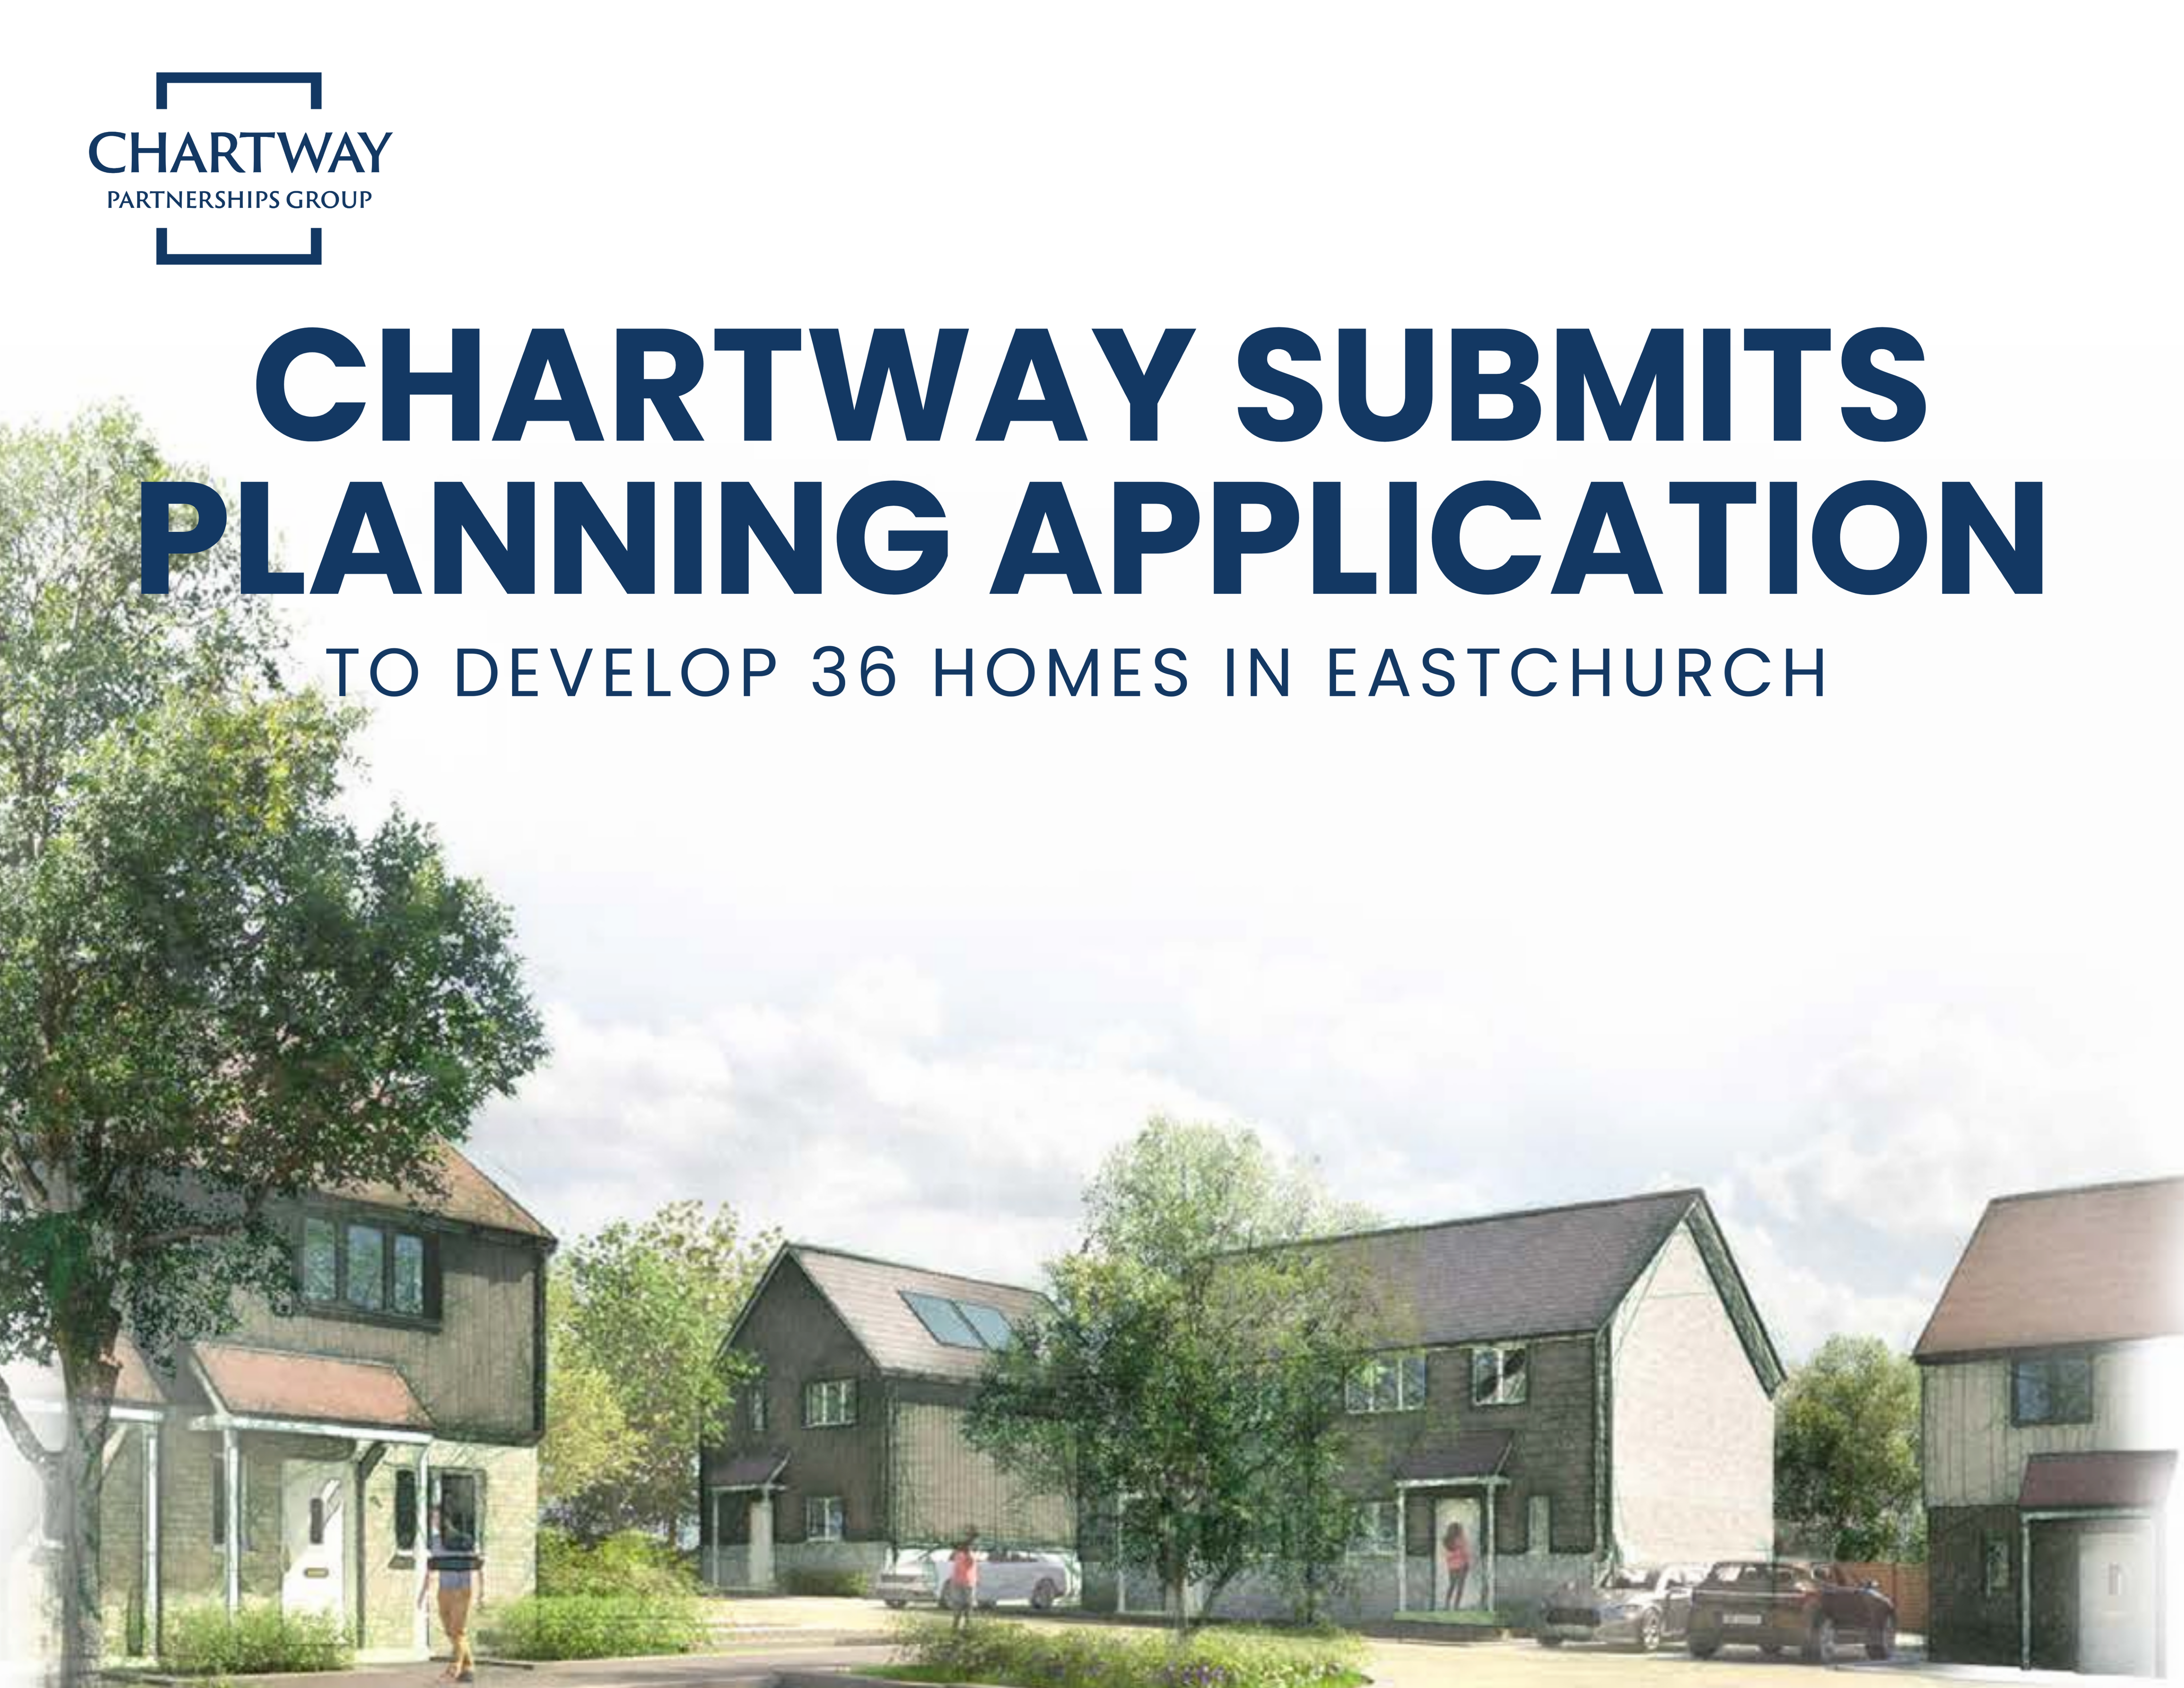 Chartway and Moat submit plans for 36 new homes in Eastchurch on the Isle of Sheppey